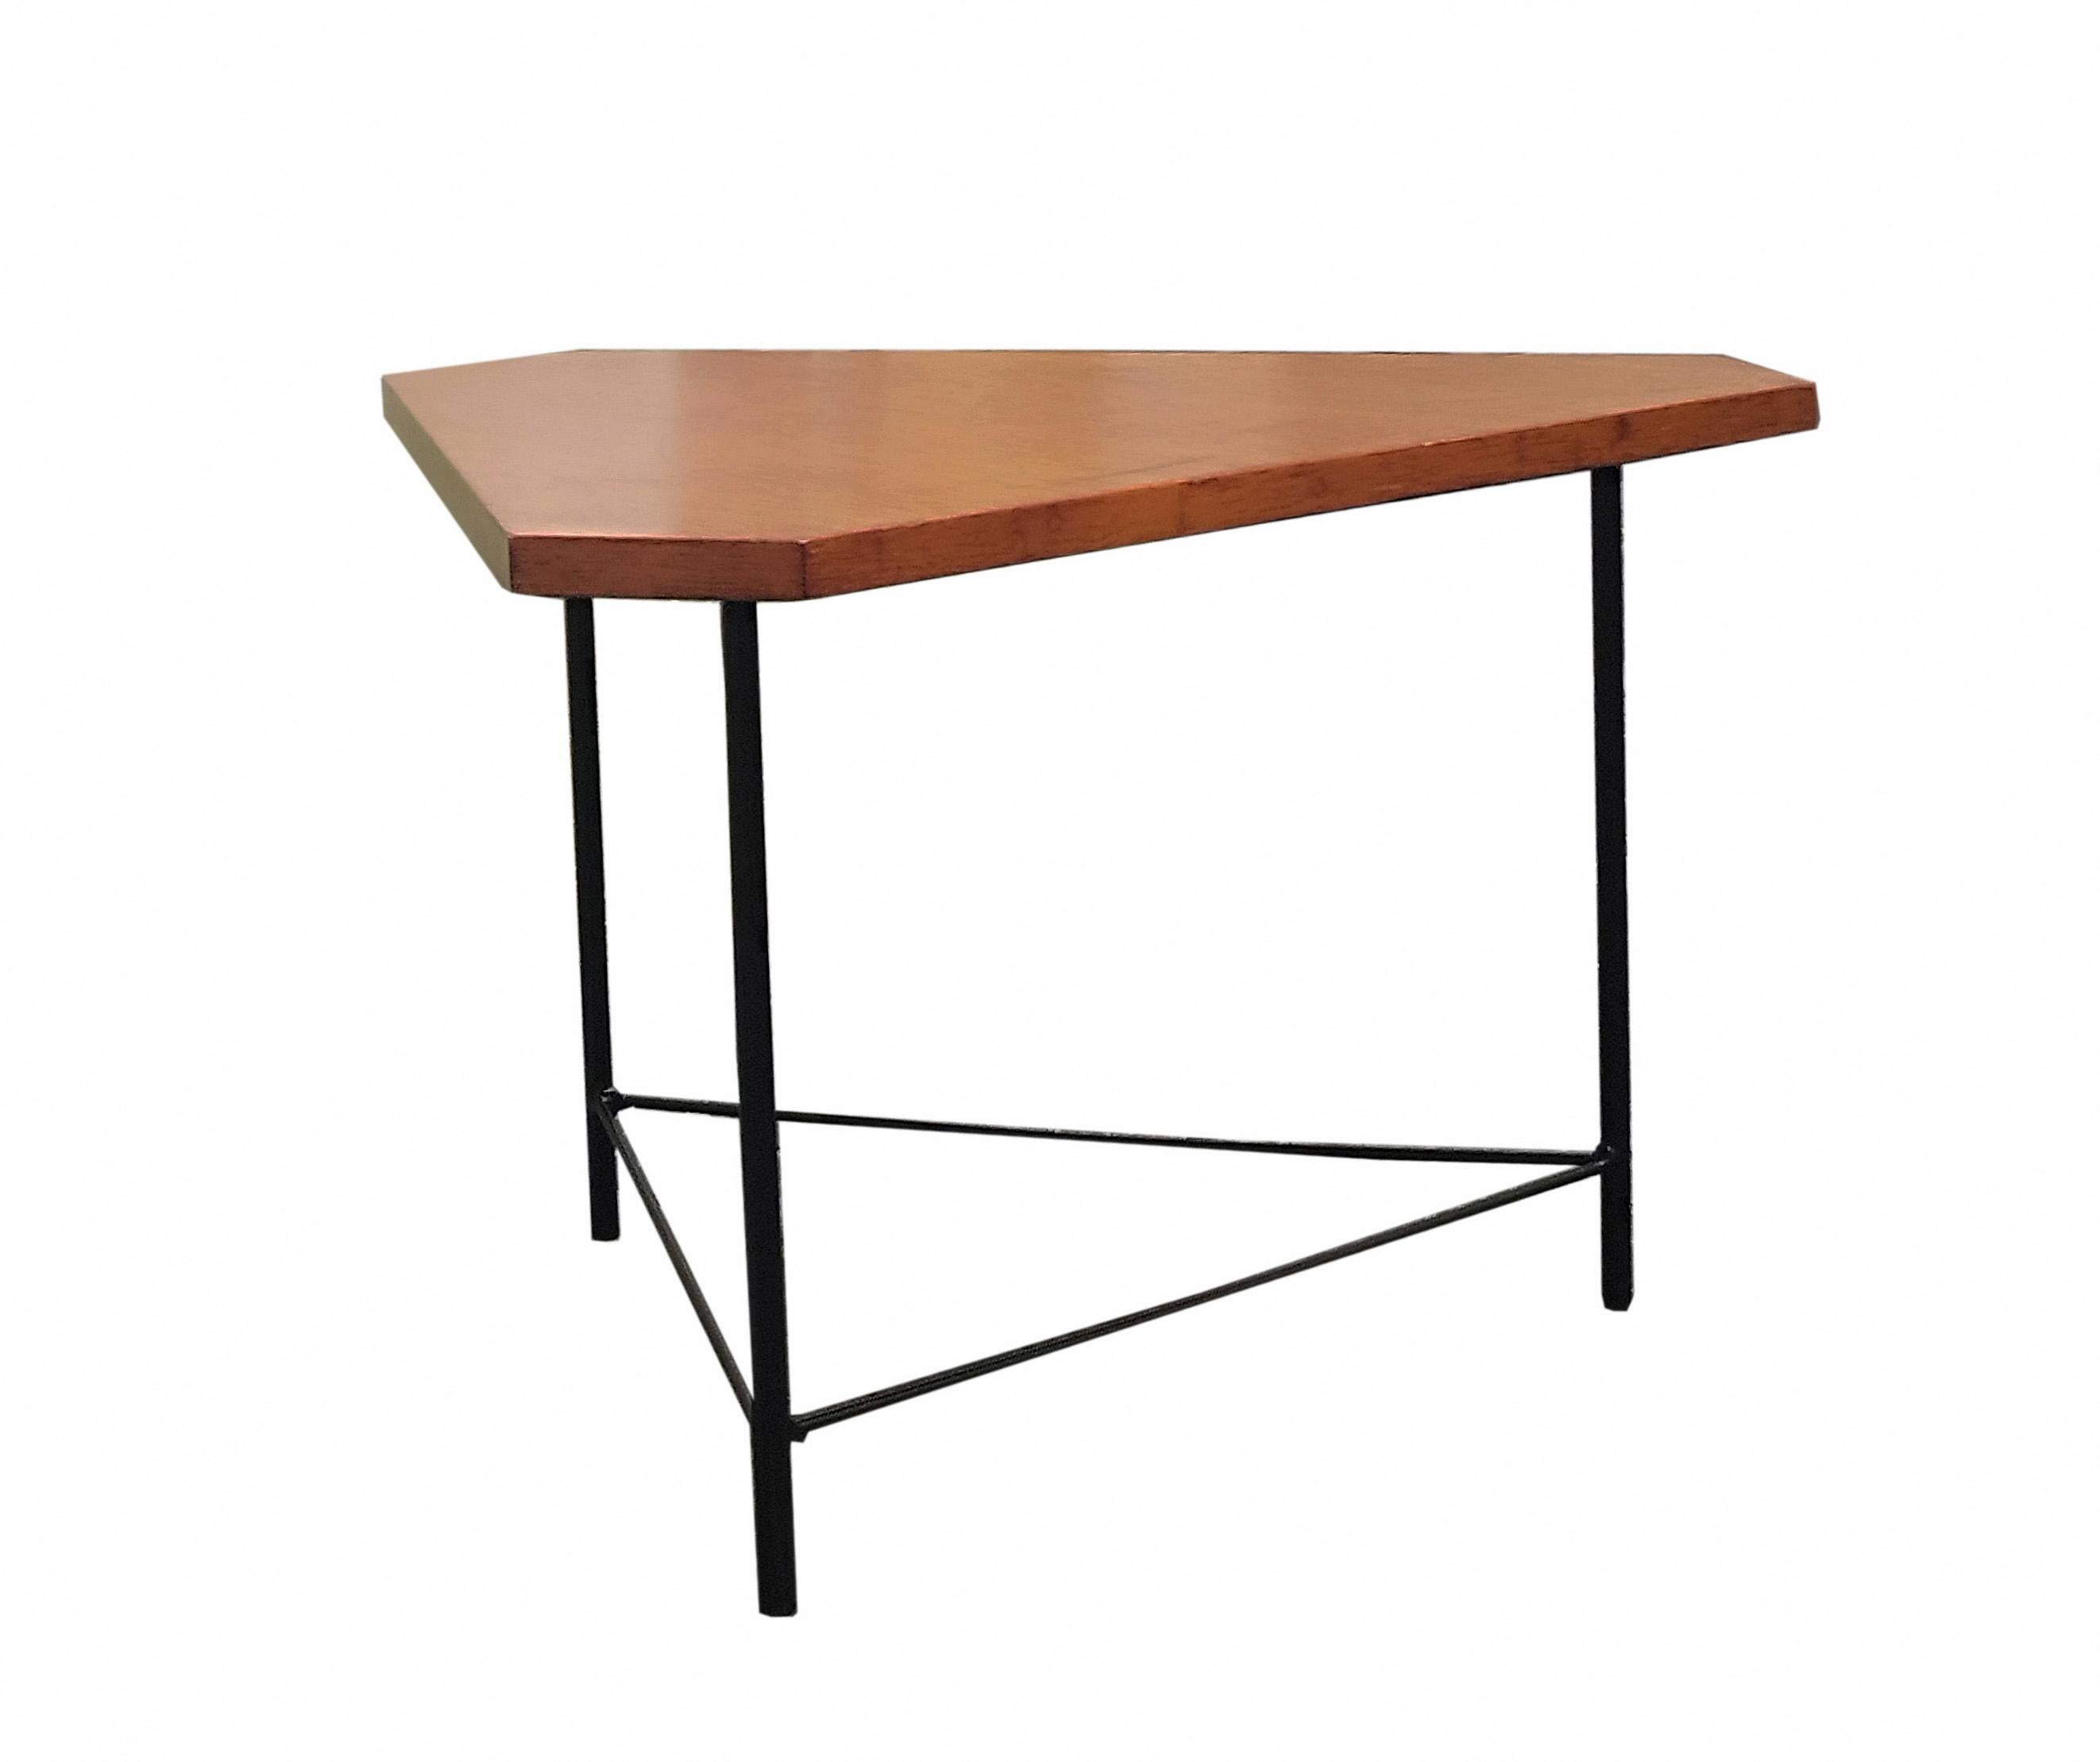 Low table with lacquered metal frame and wooden top. Original label.
Prod. ISA, Italy, ca. 1950.